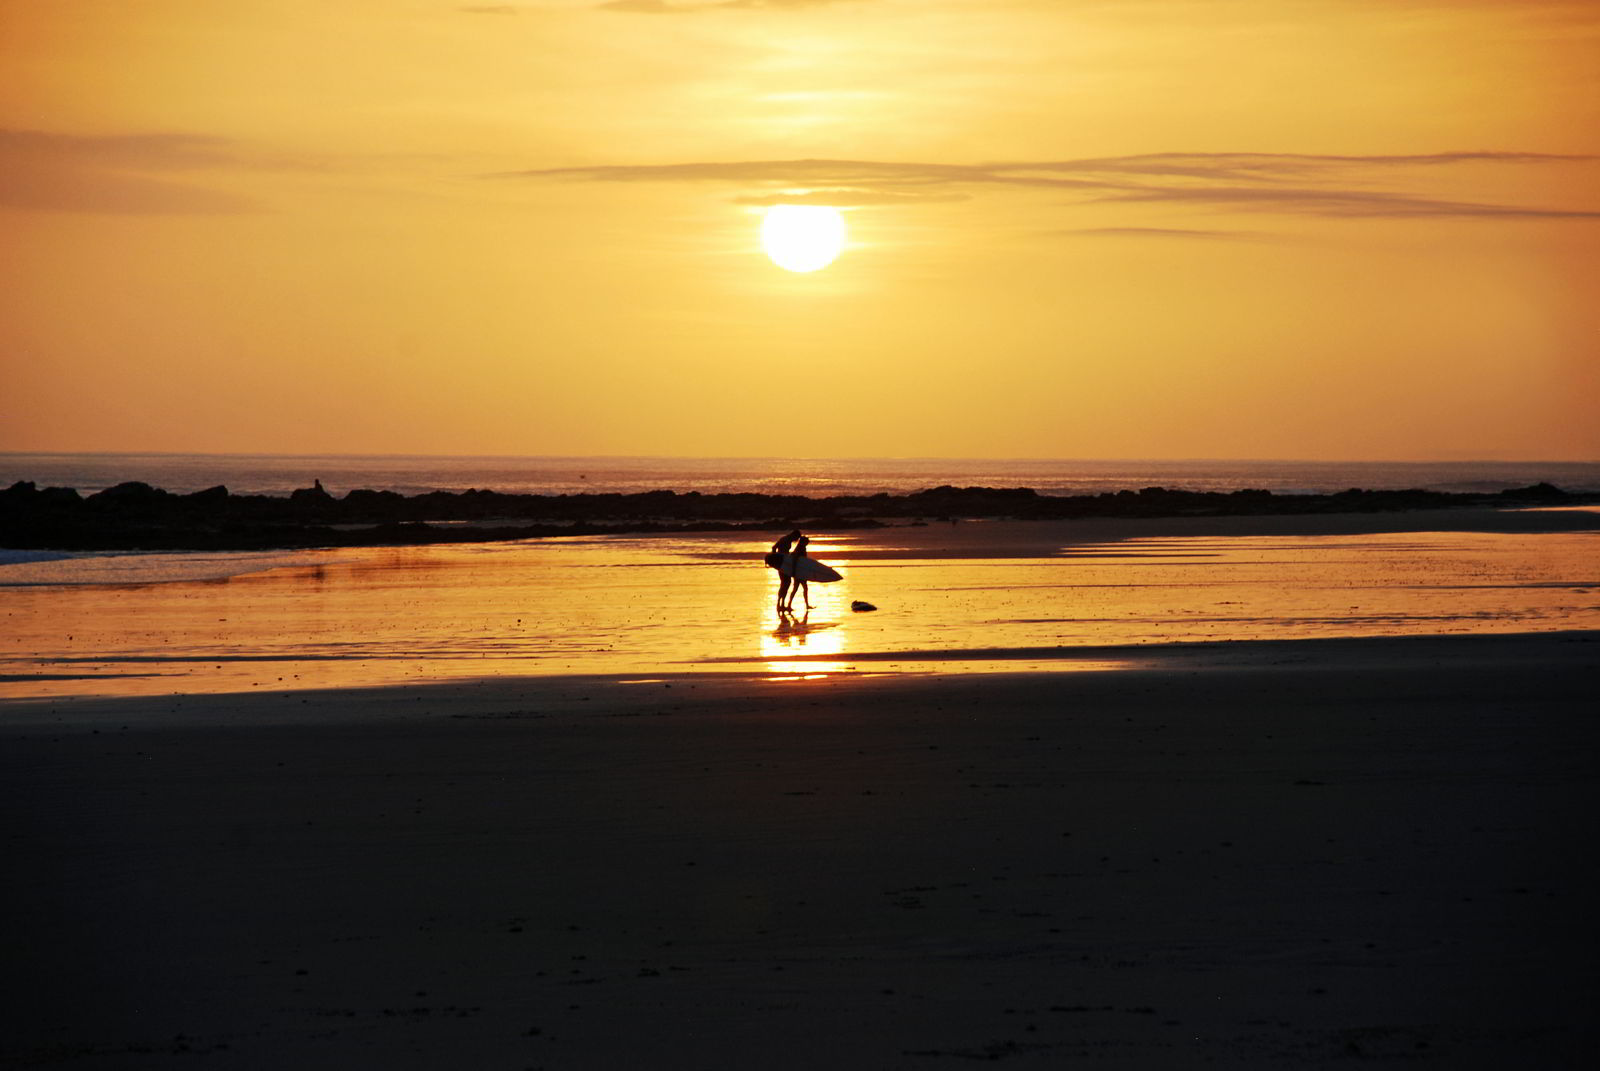 An image of two surfers carrying their surfboards at Playa Hermosa Beach at sunset - surfing in Costa Rica